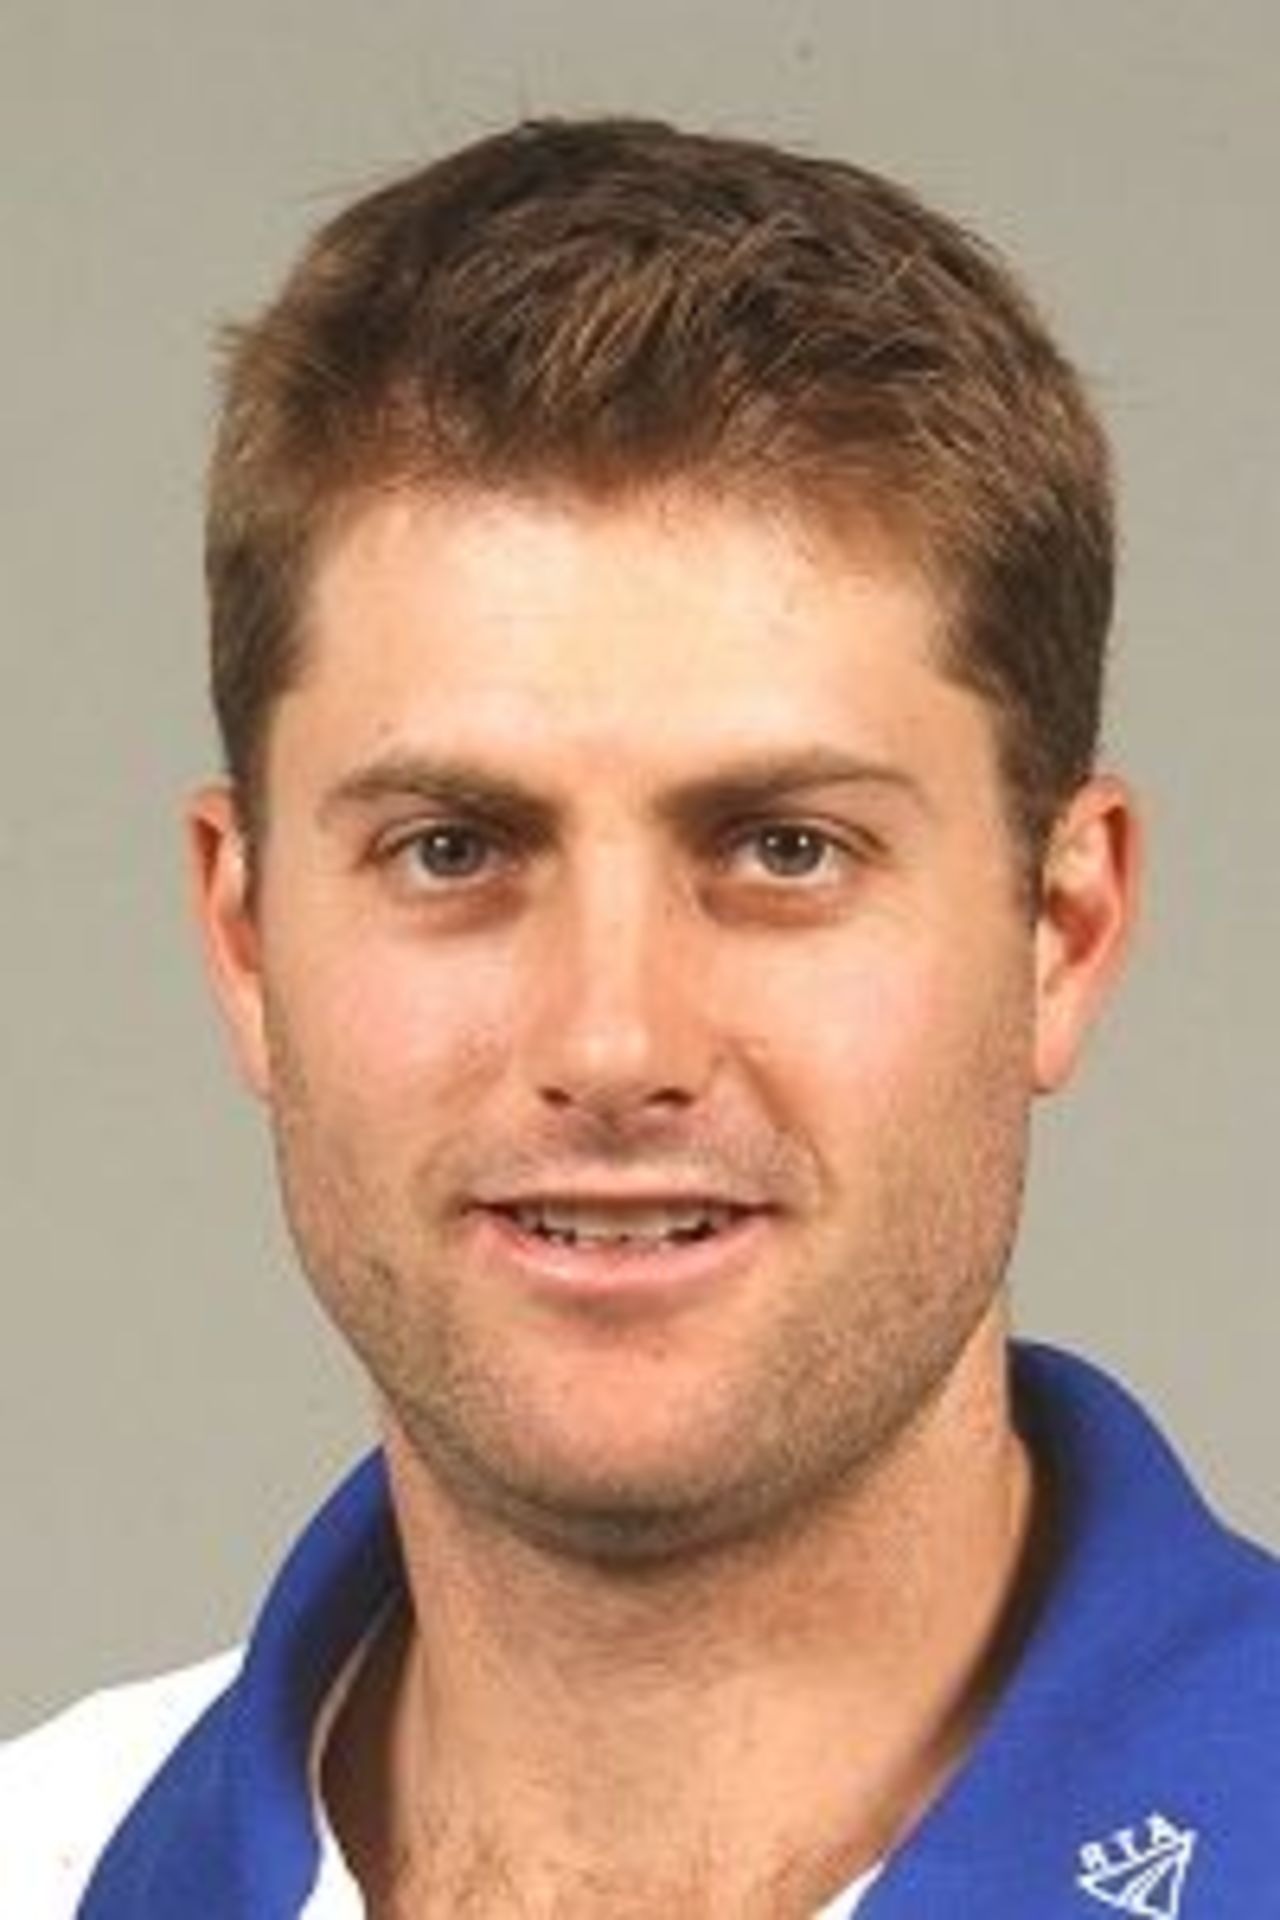 Portrait of Simon Katich, New South Wales, August 2002